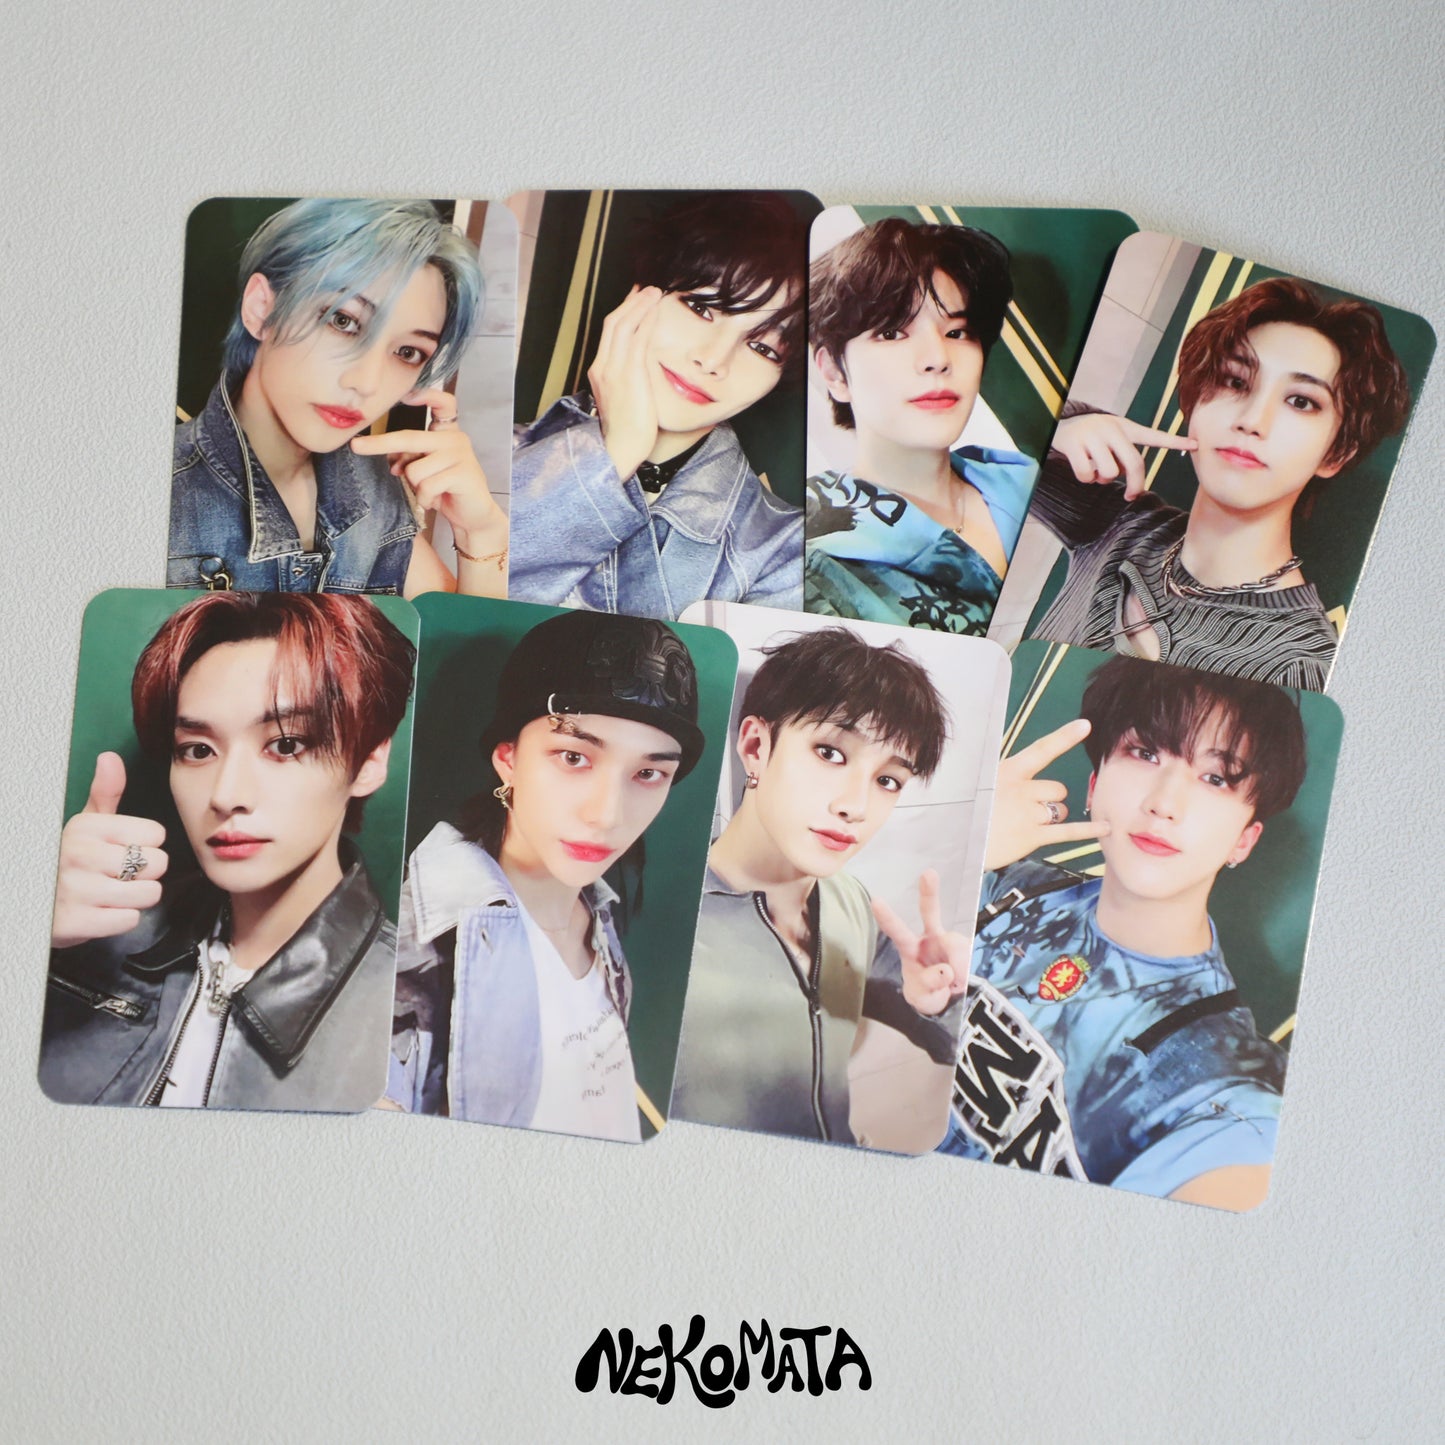 STRAY KIDS 'Rock-Star' Fanmade PHOTOCARDS